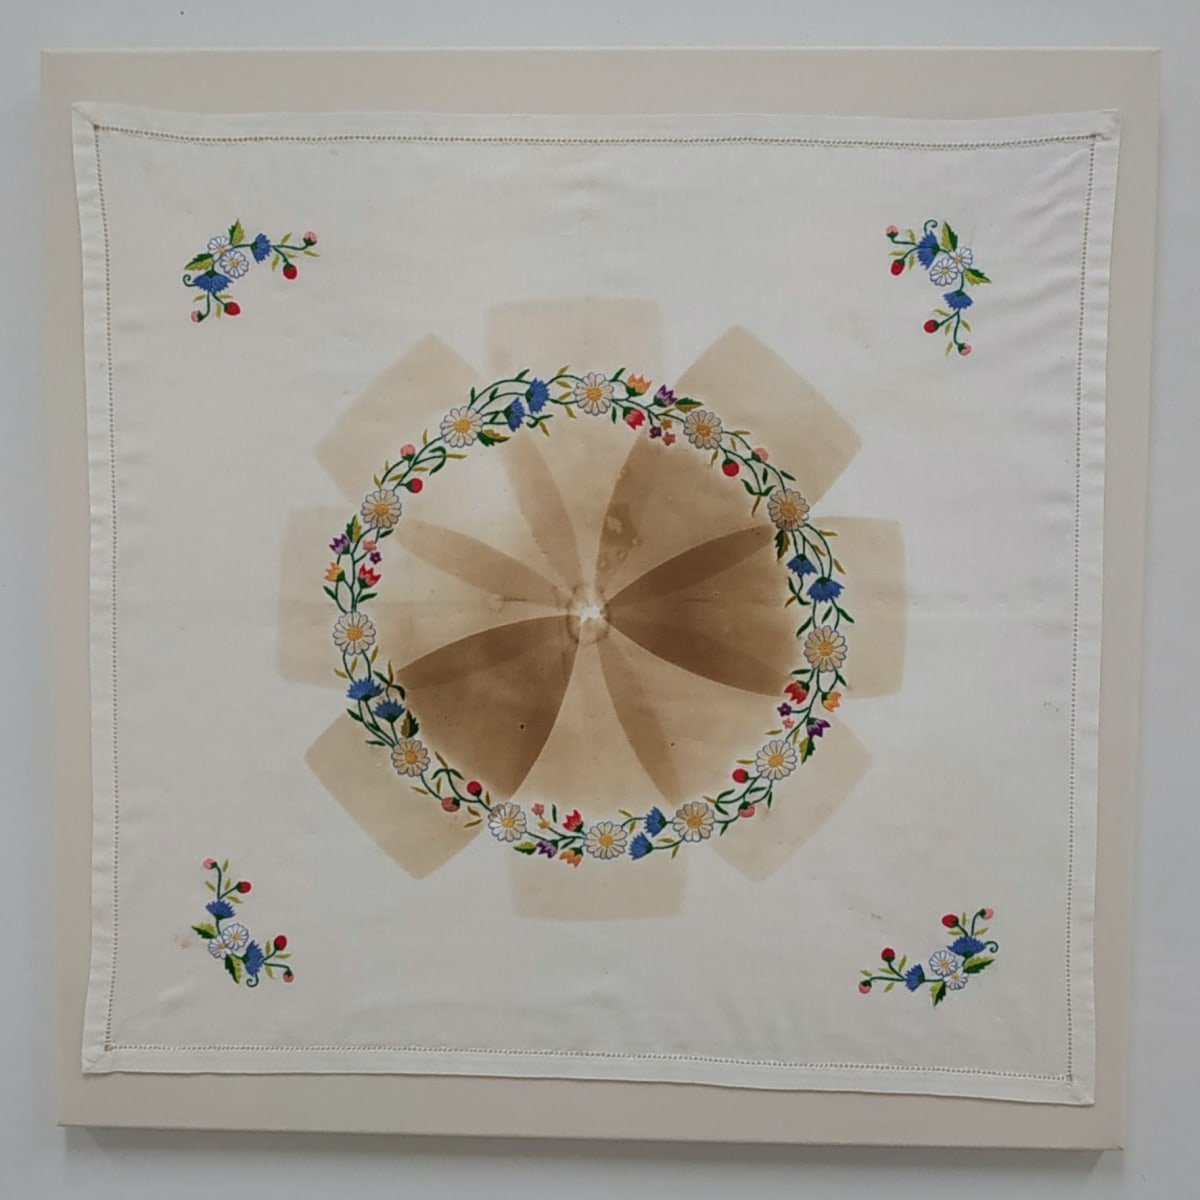 Scorch: Meditation by Lesley Turner  Image: Lesley Turner, 'Scorch: Meditation', 2020, 28"x28". Vintage tea cloth, bedsheet, polyester thread. A mandala of scorch marks ironically serves as a form of meditation for the launderer.